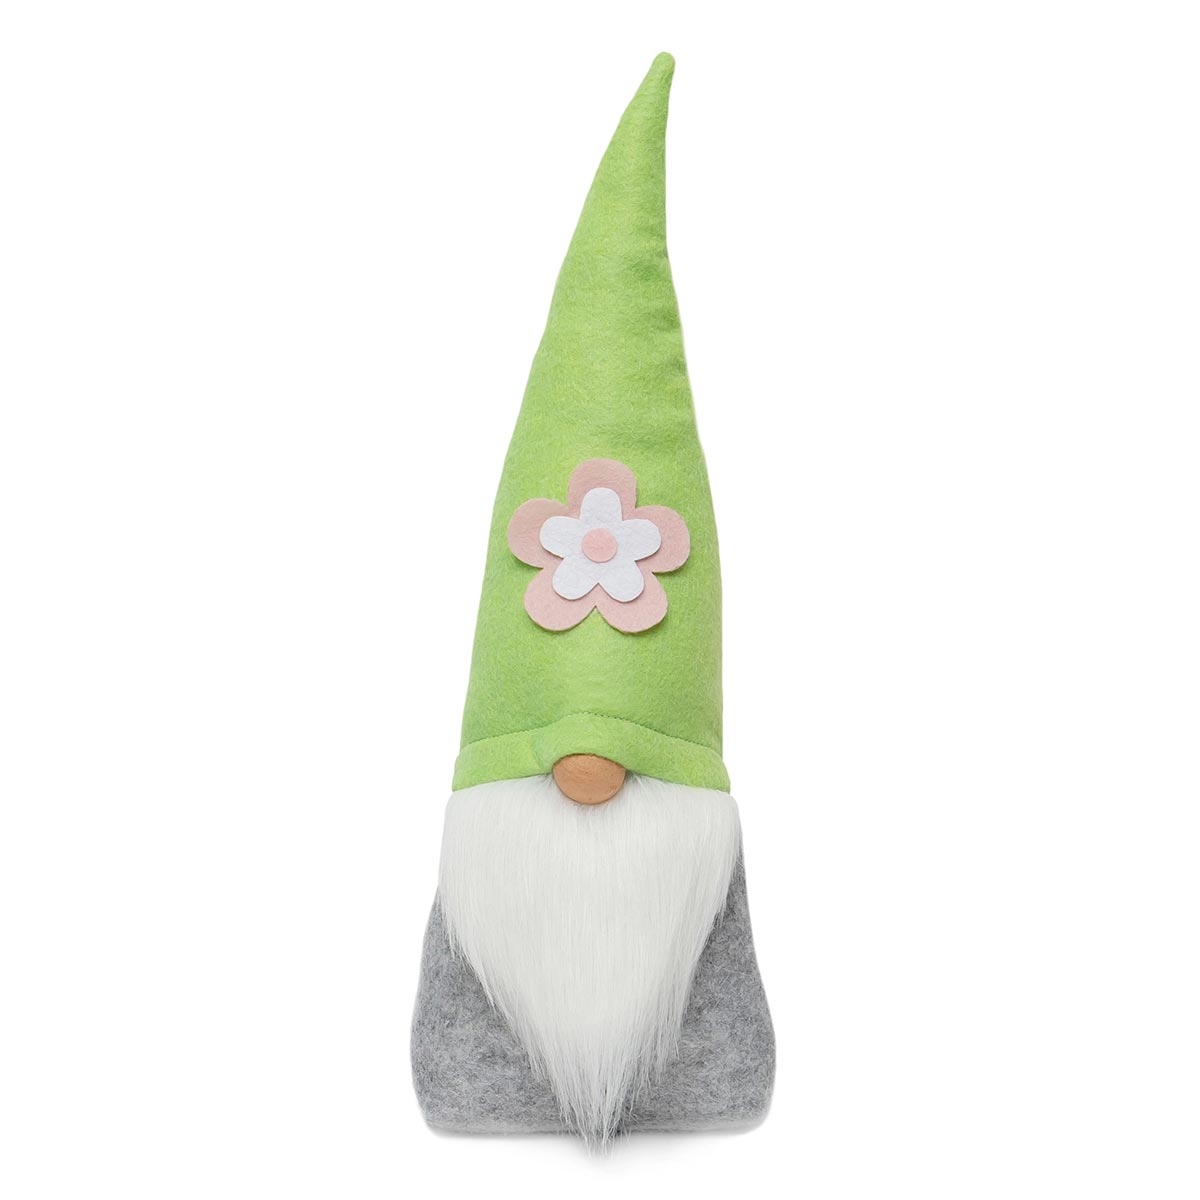 b50 Flower Power Gnome with Wood Nose 16" Large GREEN